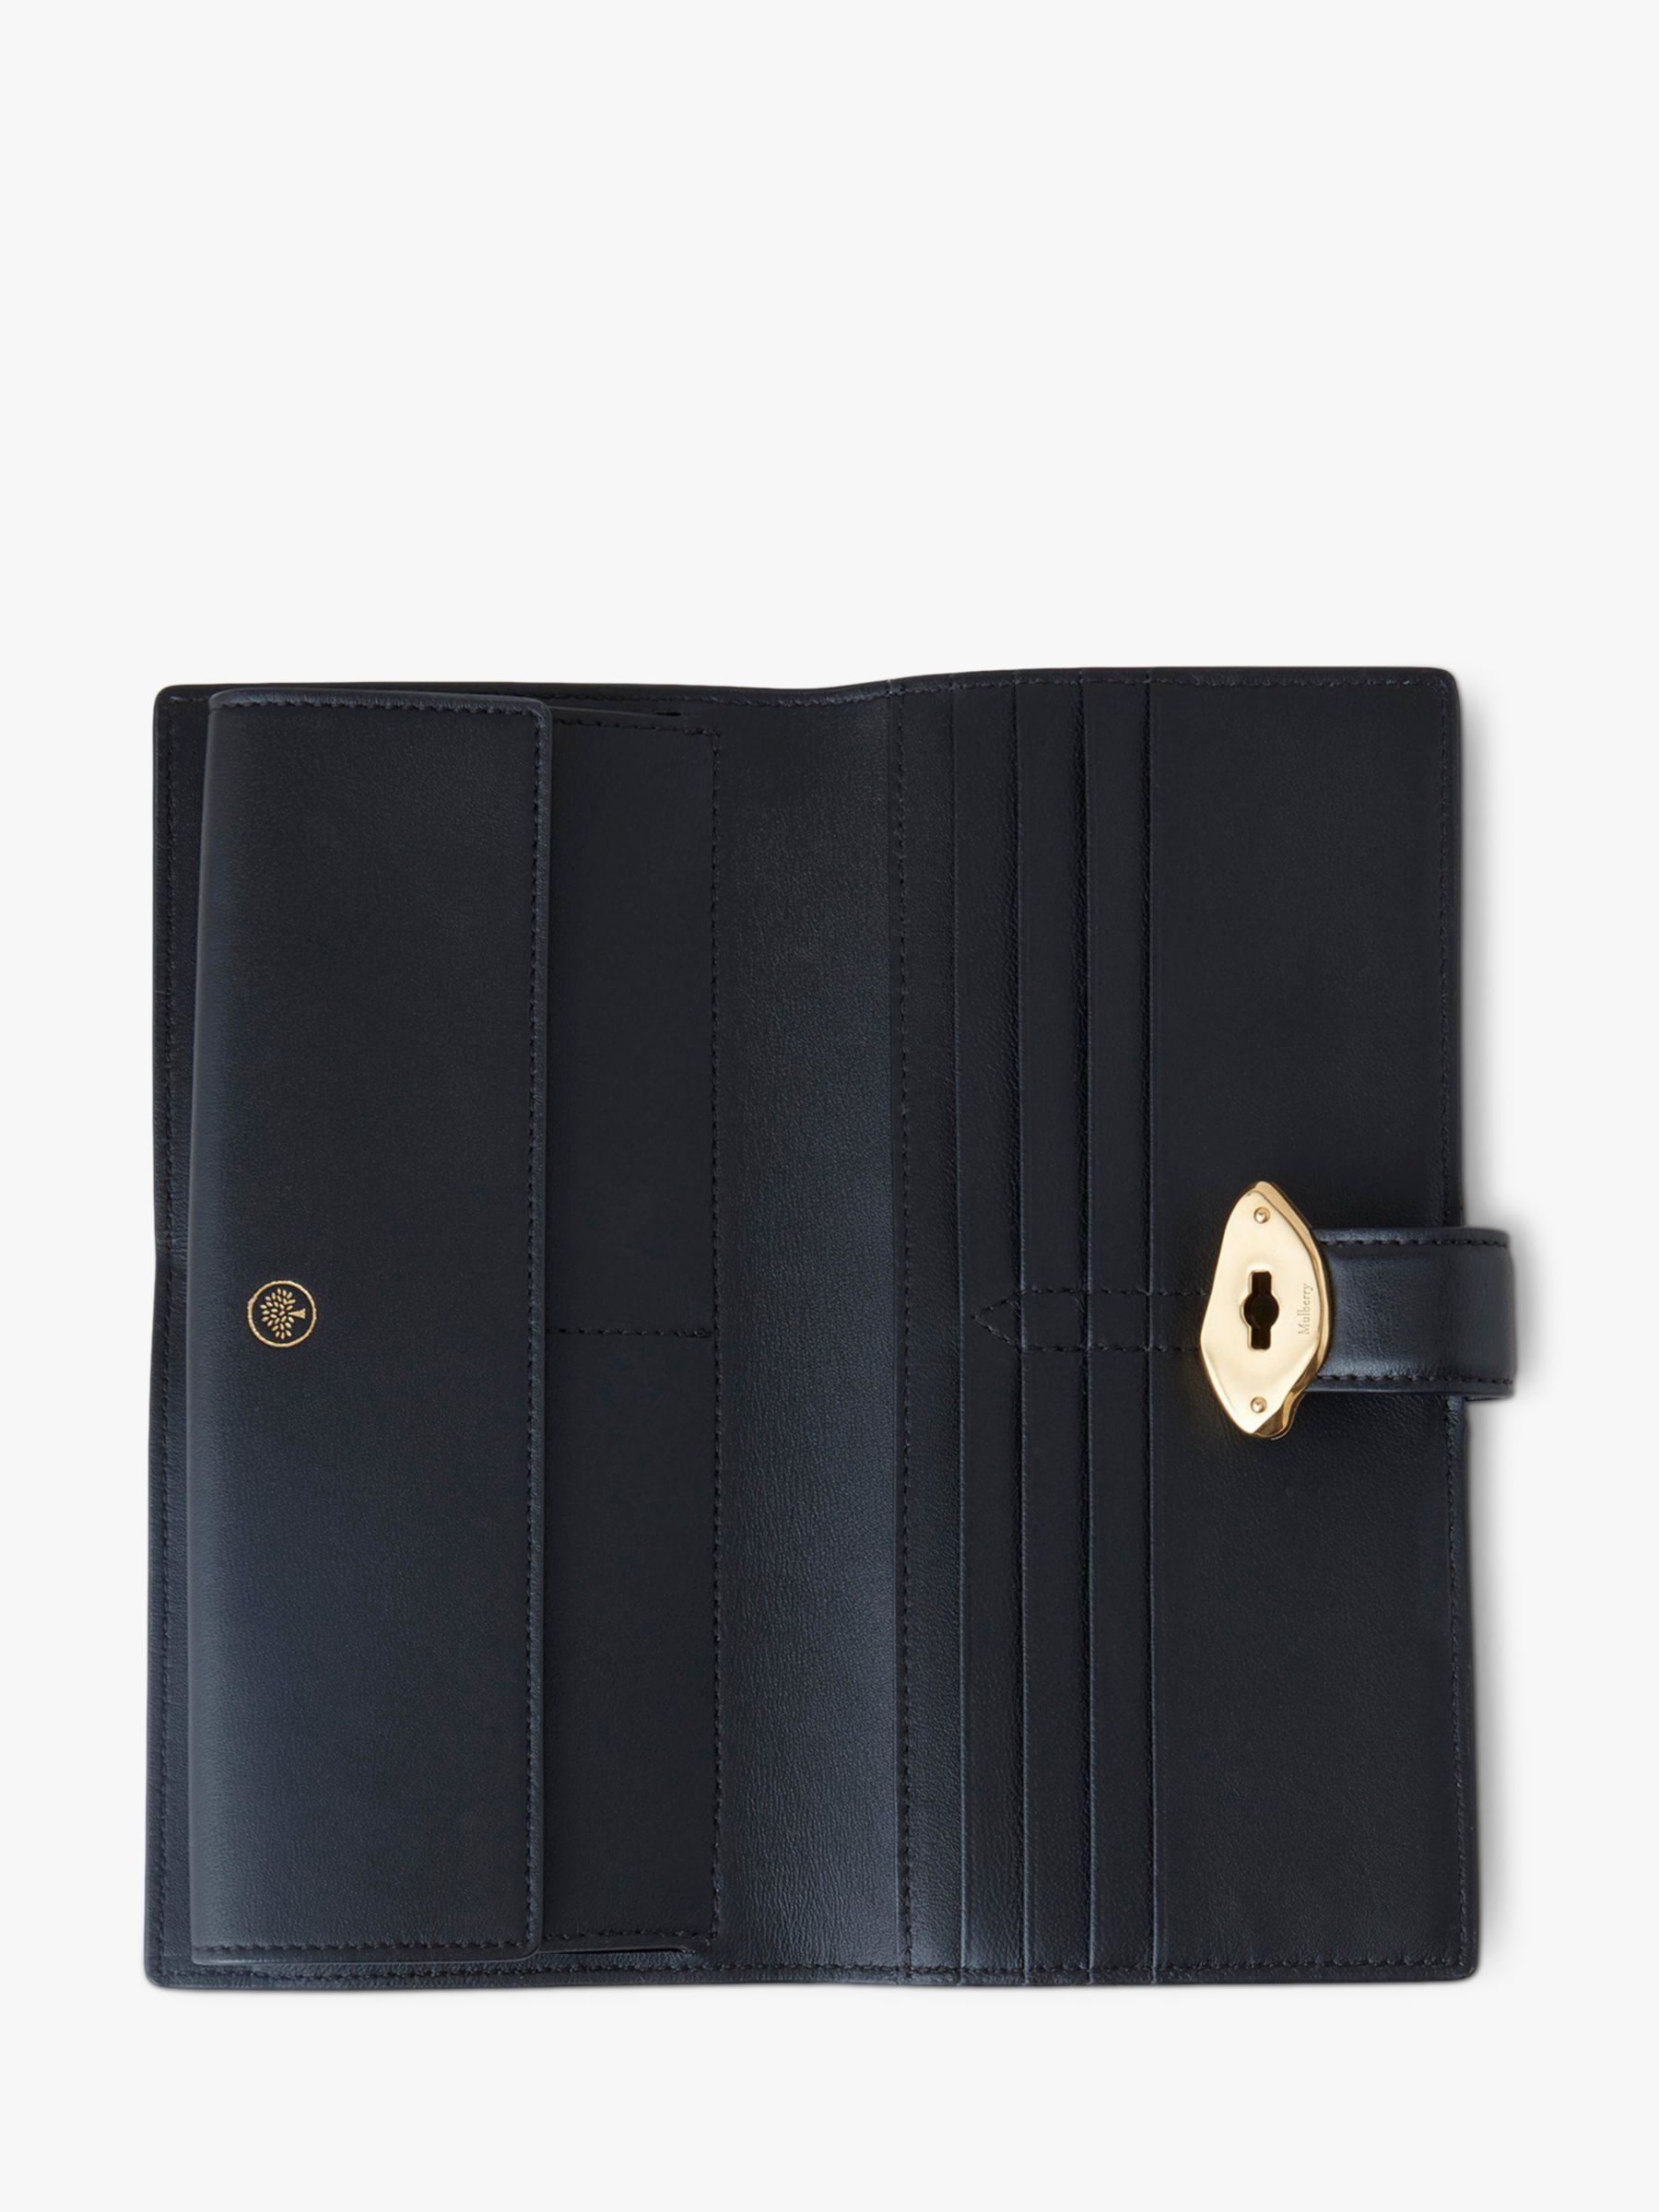 Buy Mulberry Lana Gloss Leather Long Bifold Wallet Online at johnlewis.com